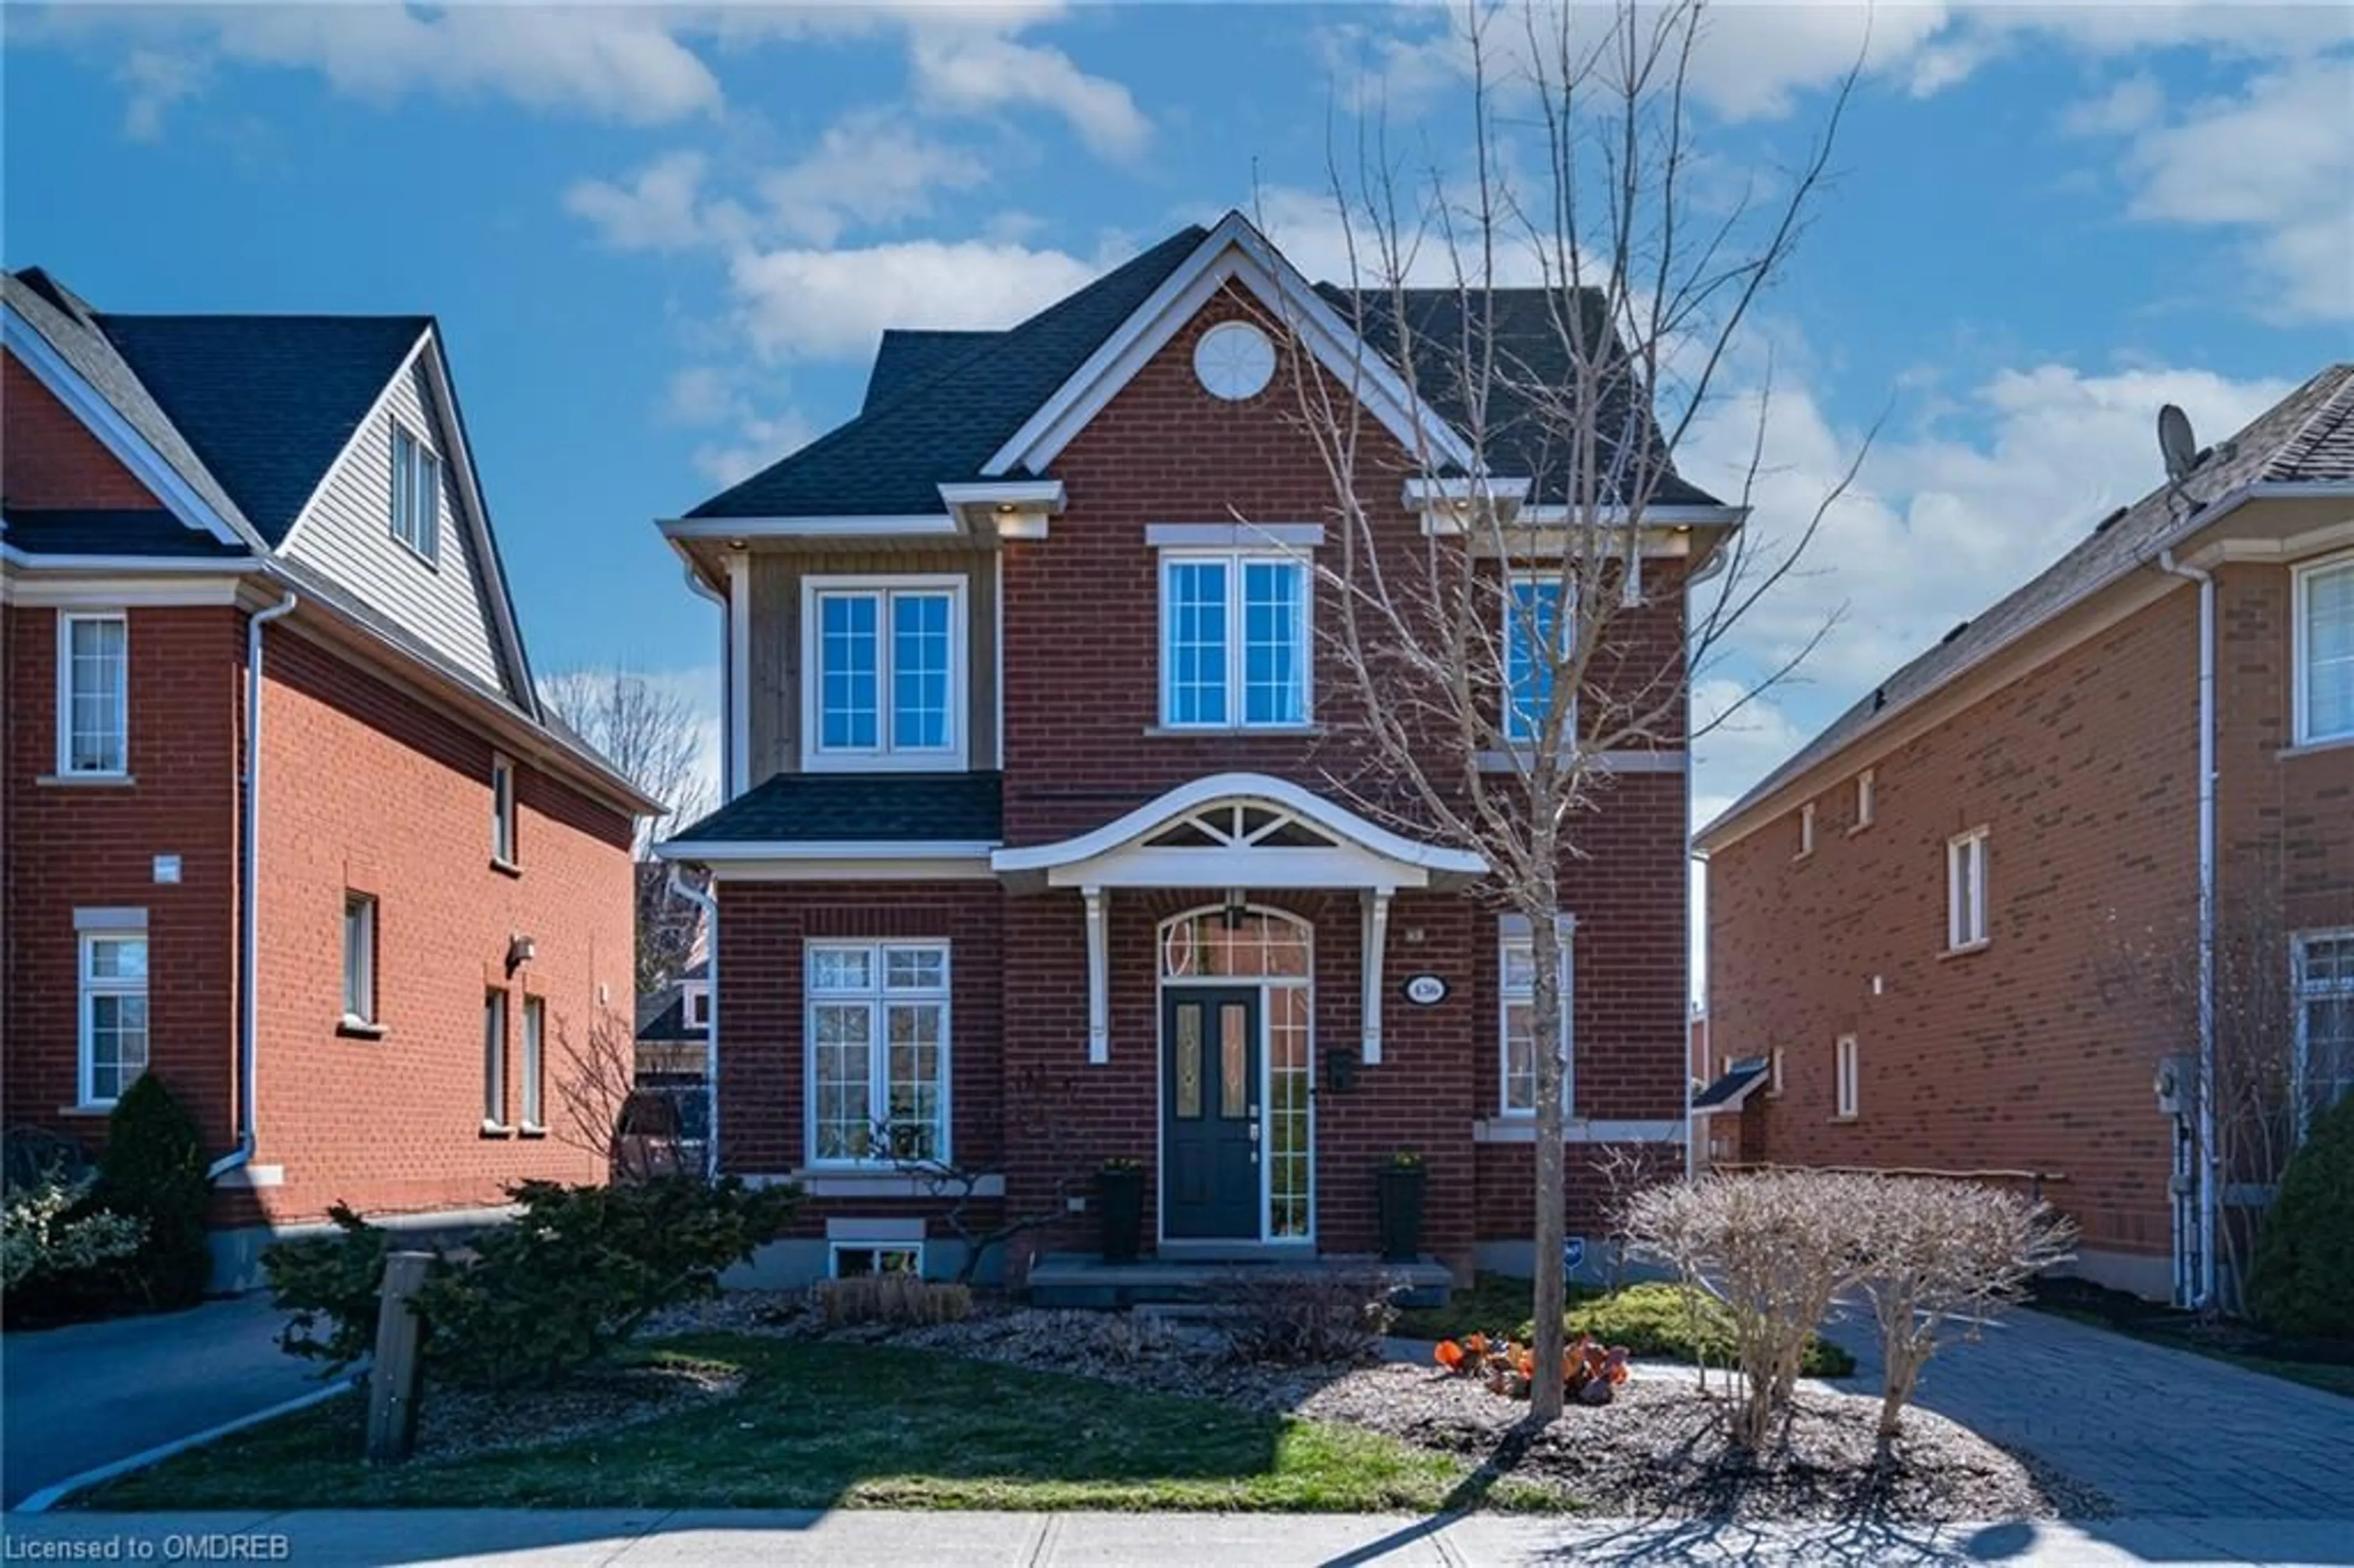 Home with brick exterior material for 436 Doverwood Dr, Oakville Ontario L6H 6N7